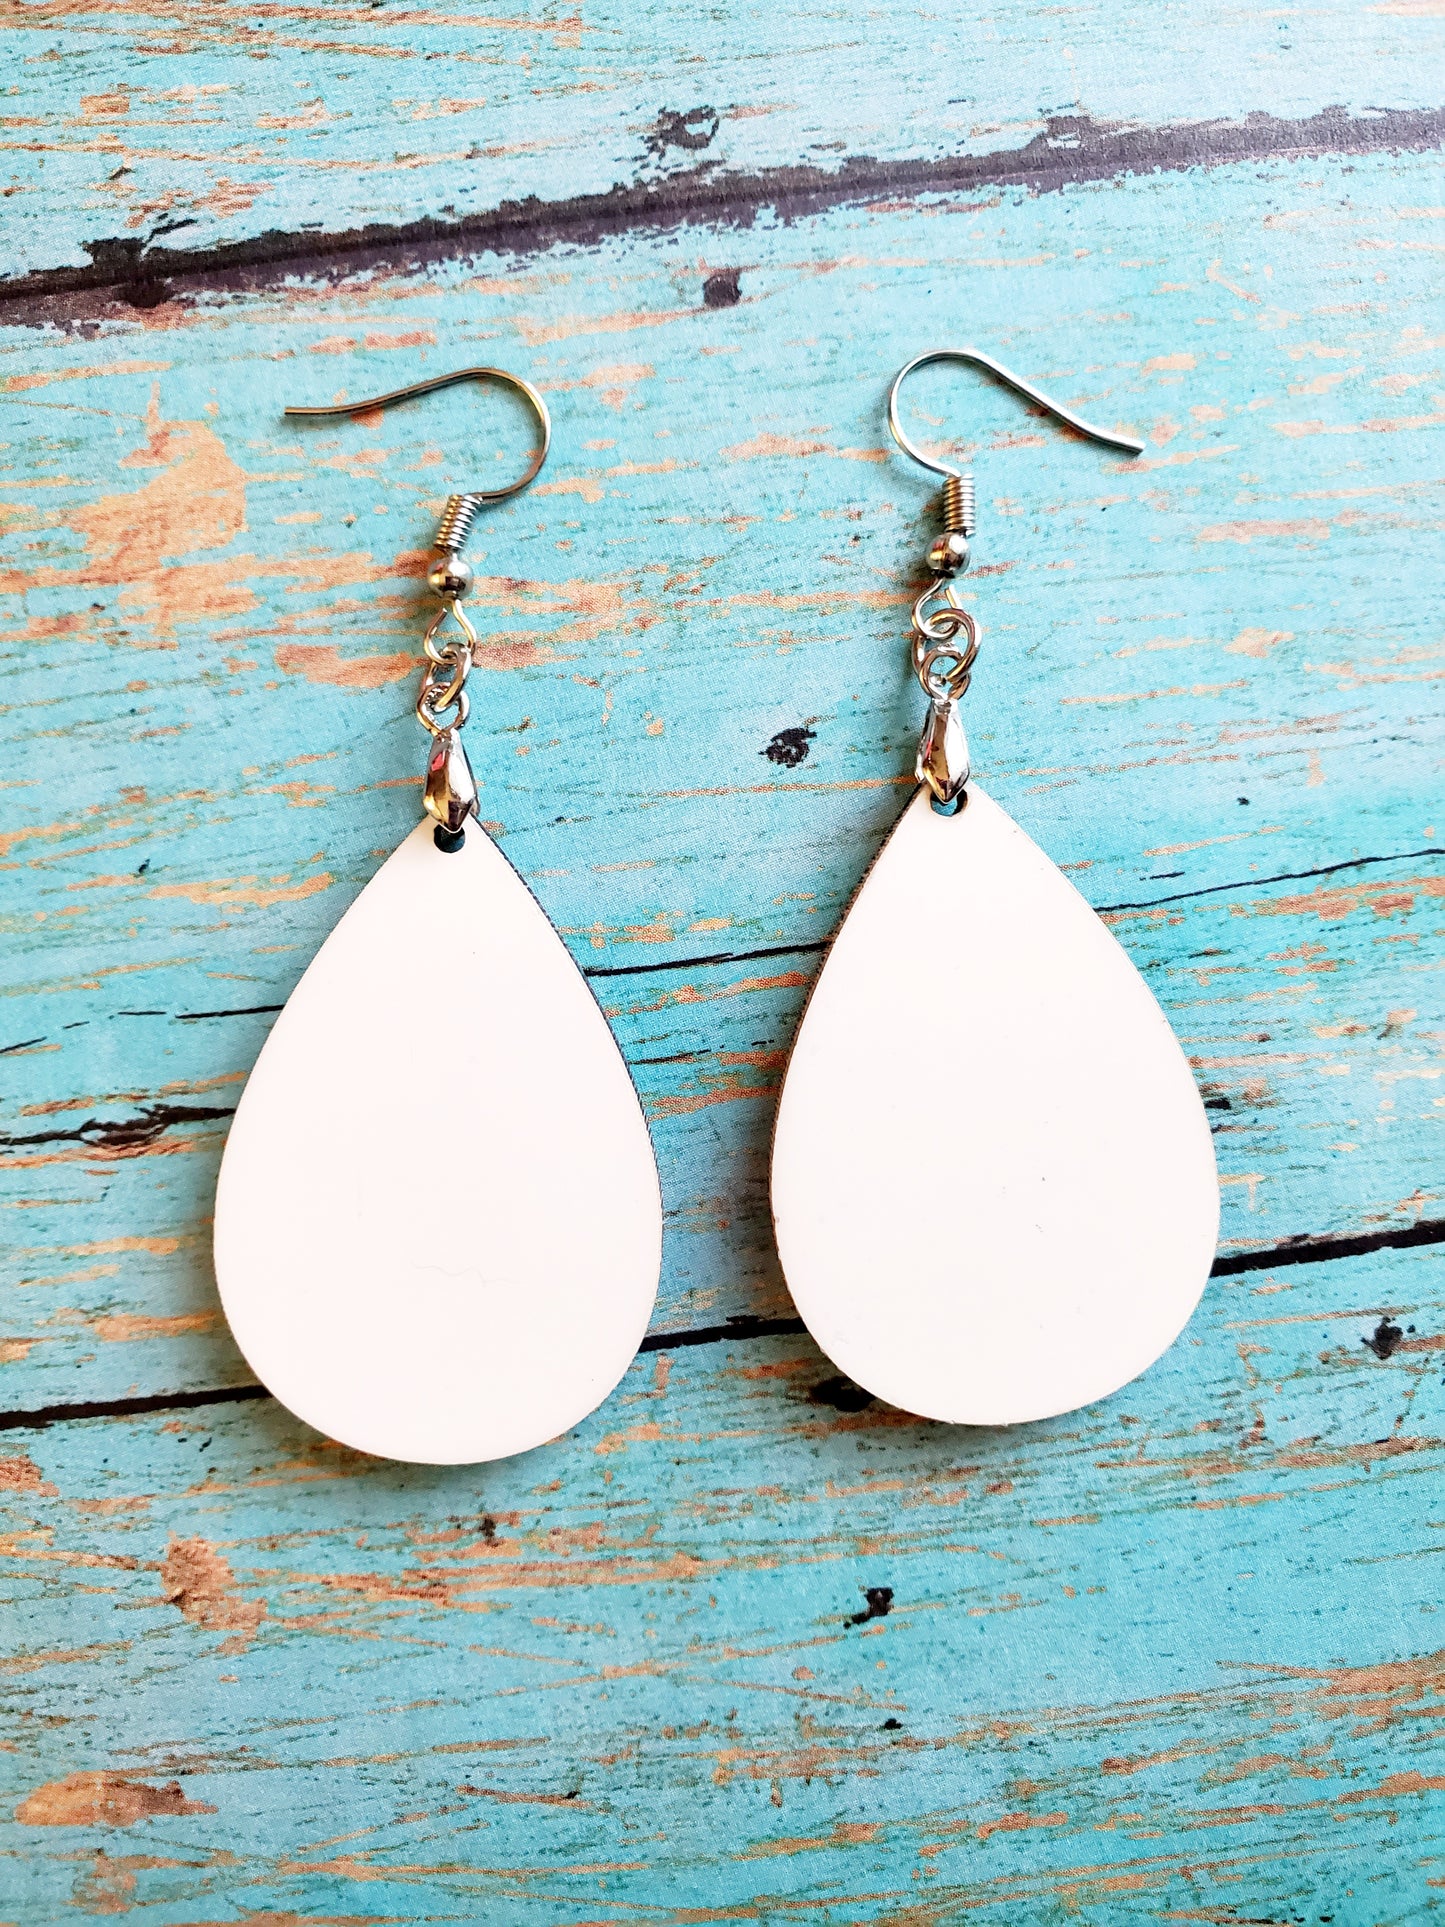 Pair of Teardrop Shape MDF Earrings with Hanging Hardware (set of 2). Laserable!